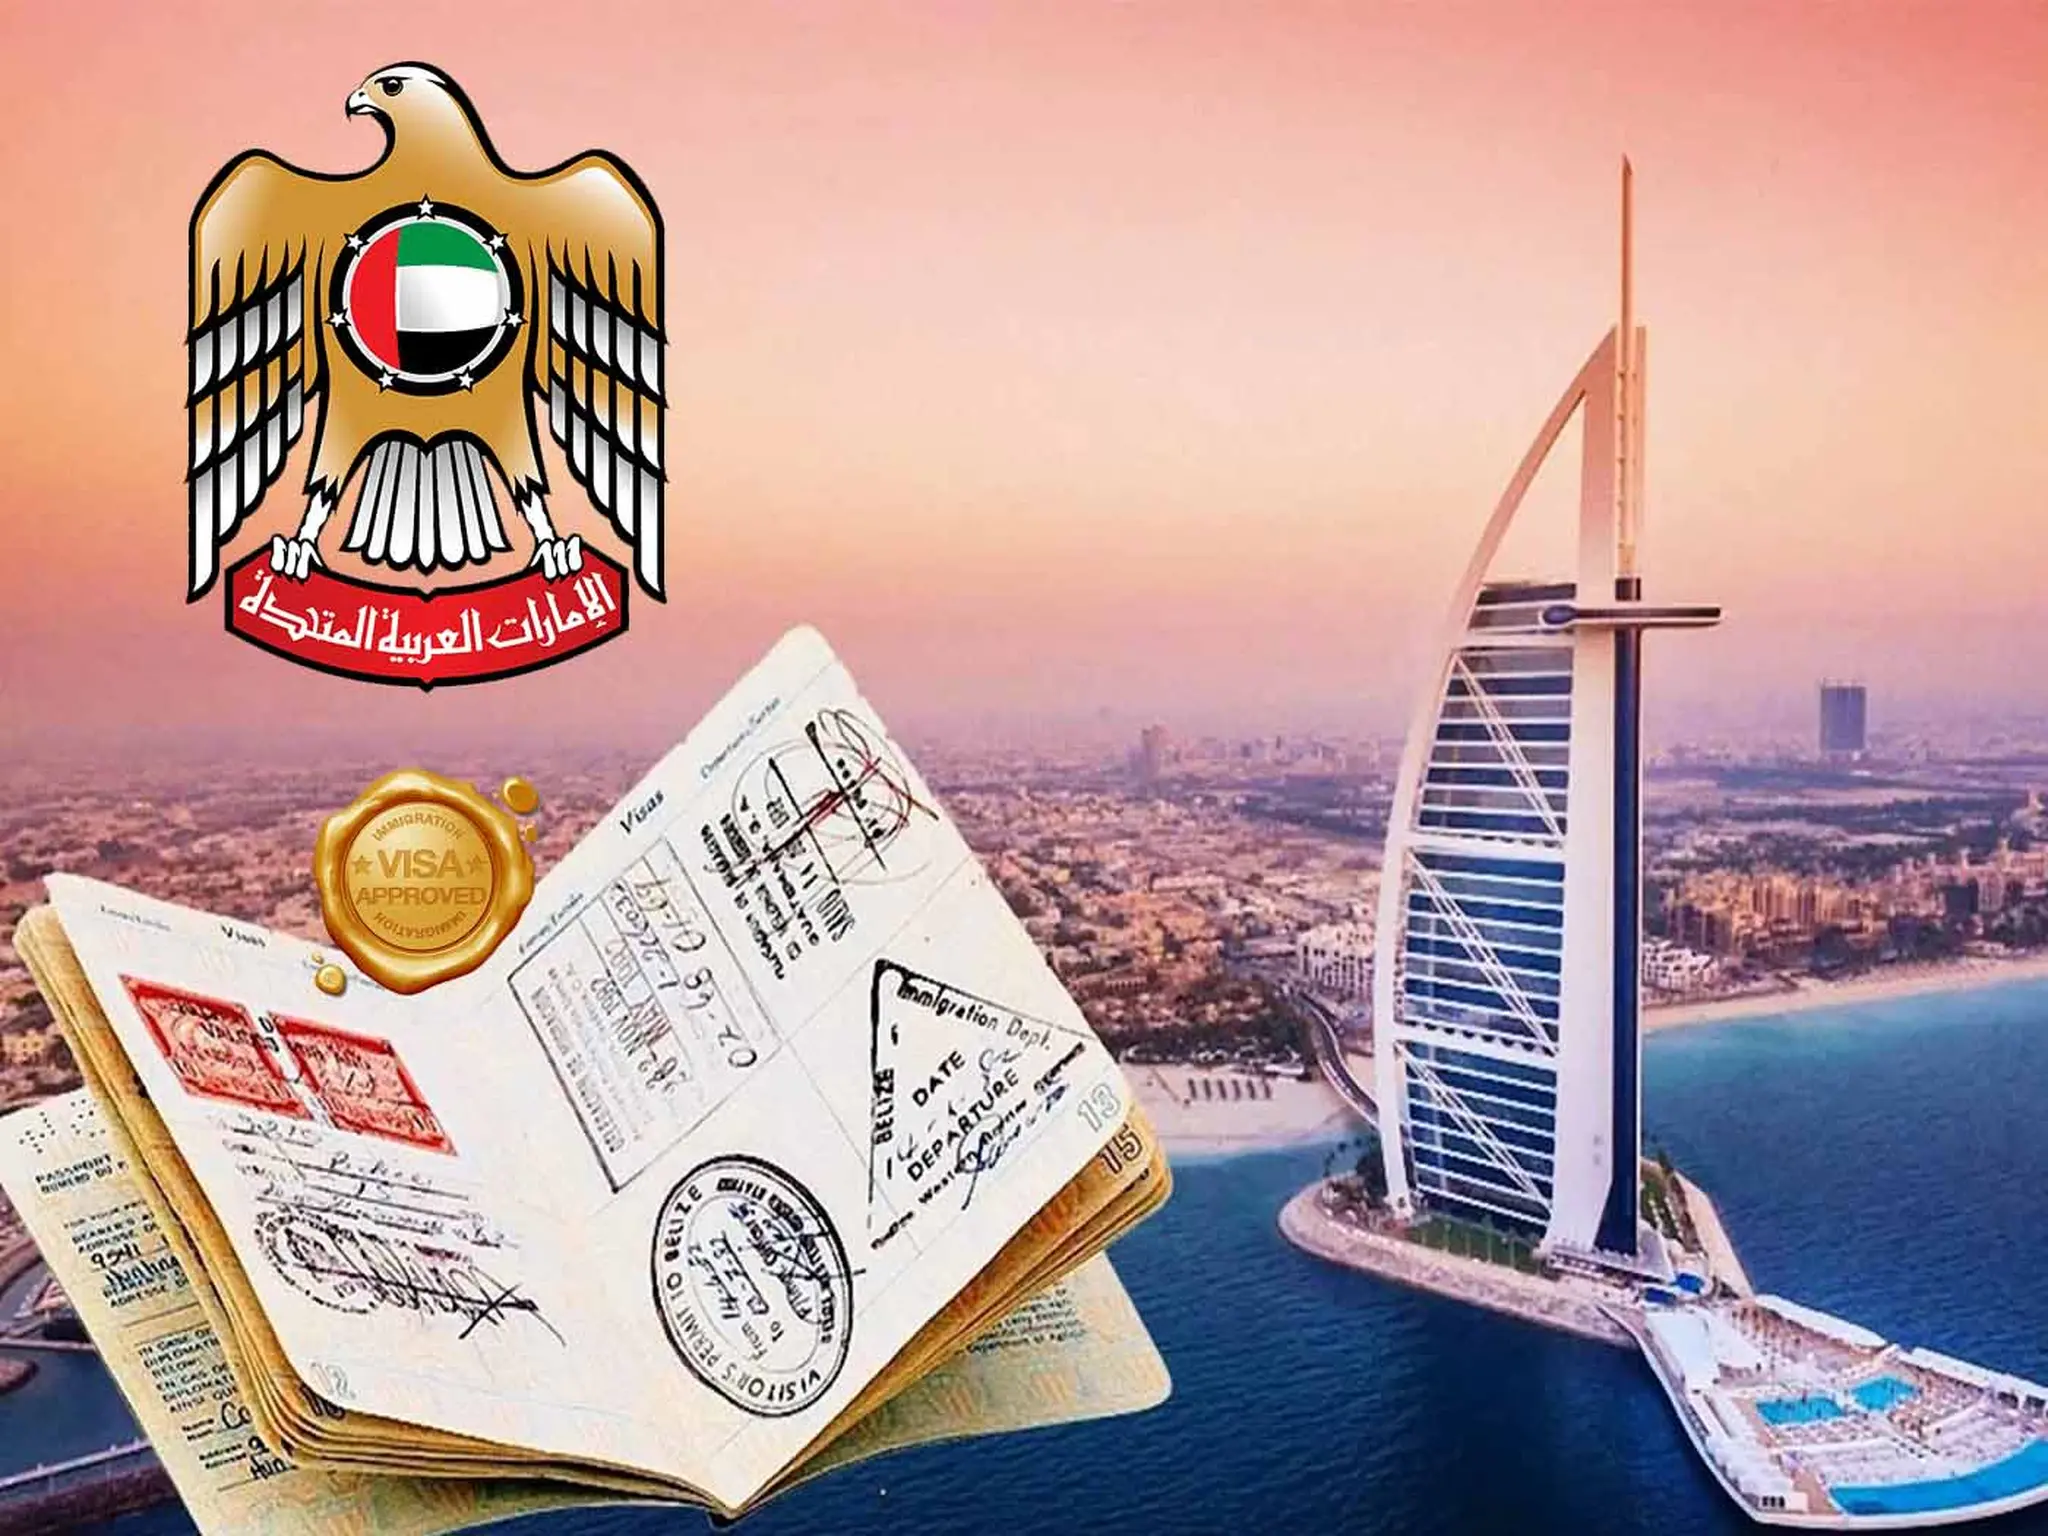 The UAE provides a long-term residence visa for specialized qualifications